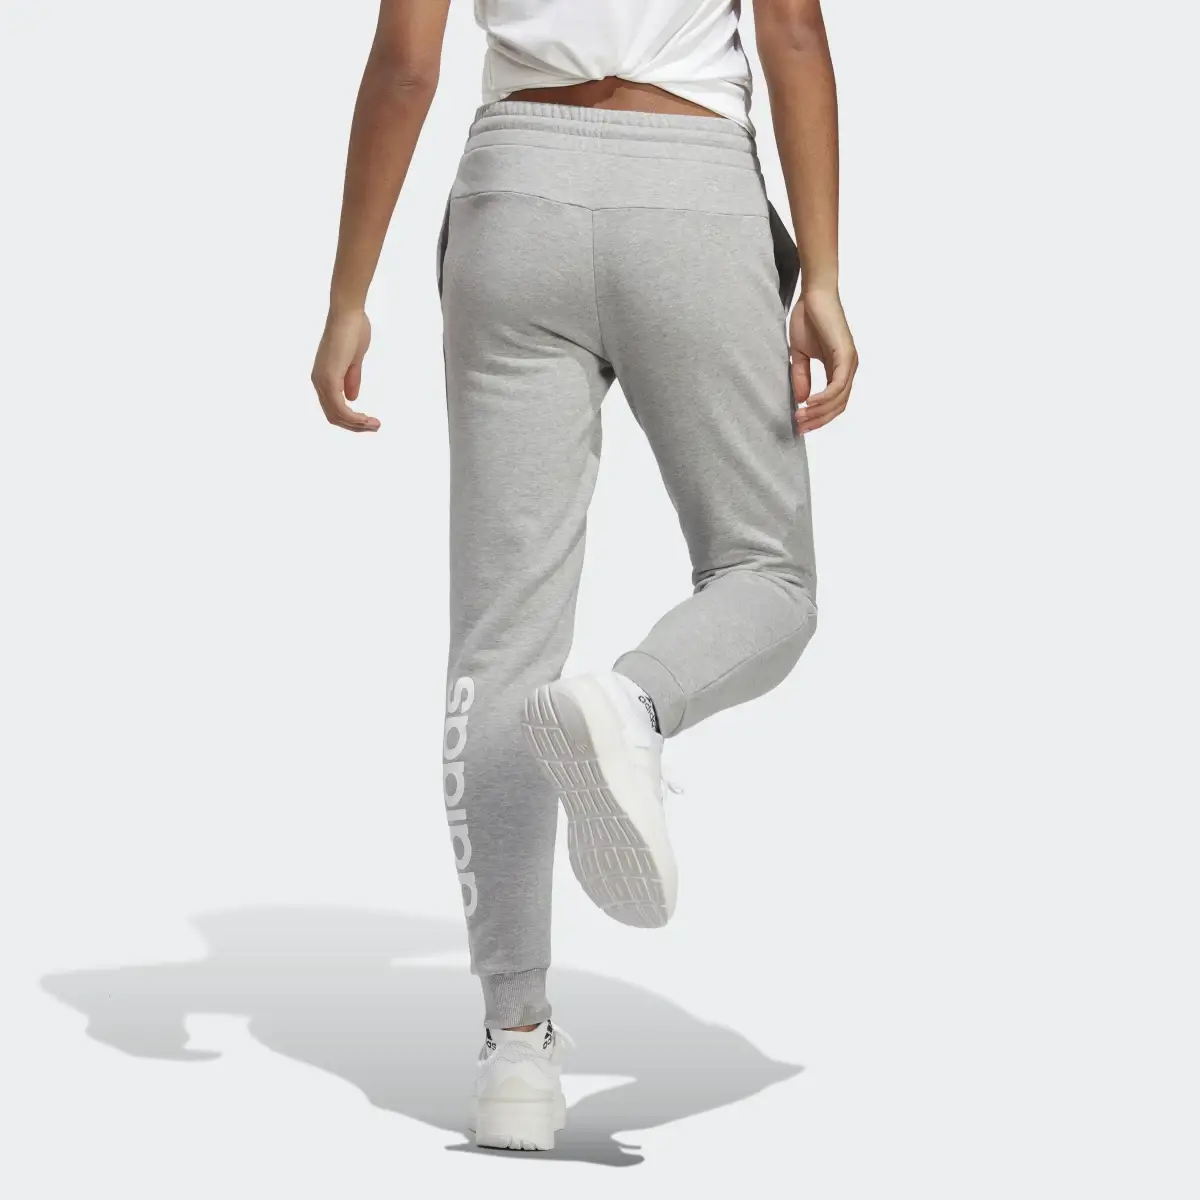 Adidas Essentials Linear French Terry Cuffed Pants. 2